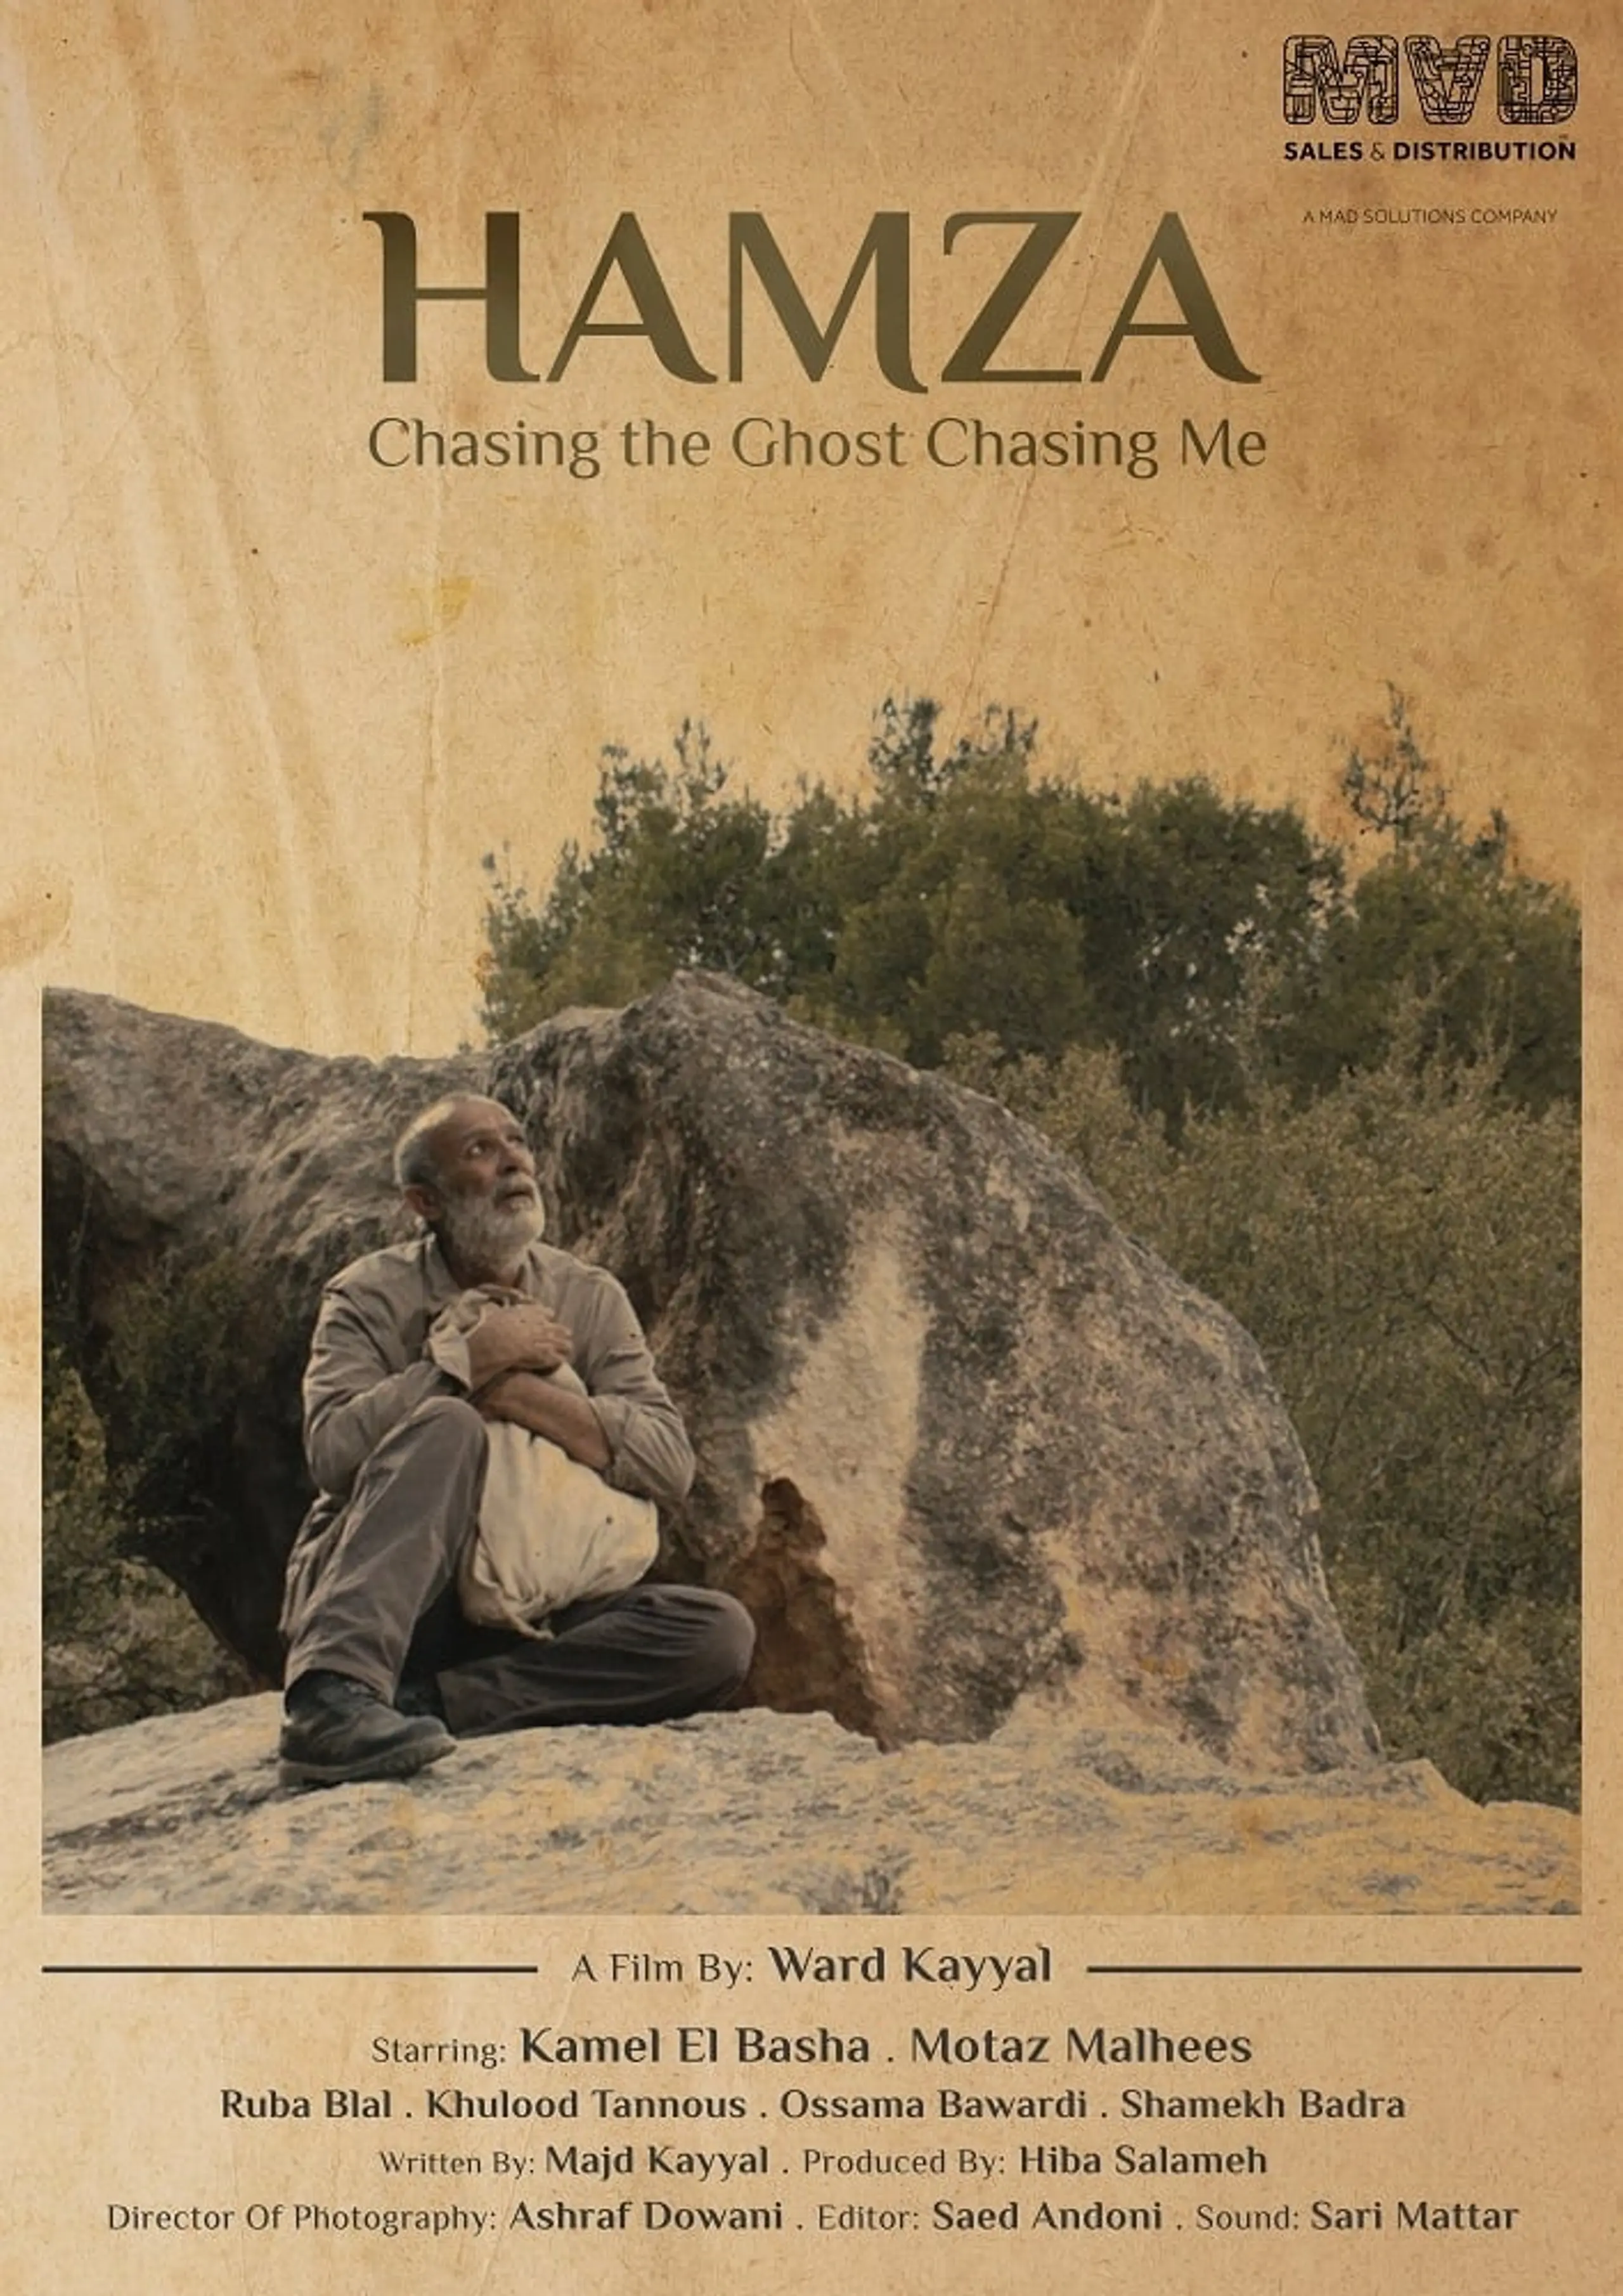 Hamza - Chasing the Ghost Chasing Me